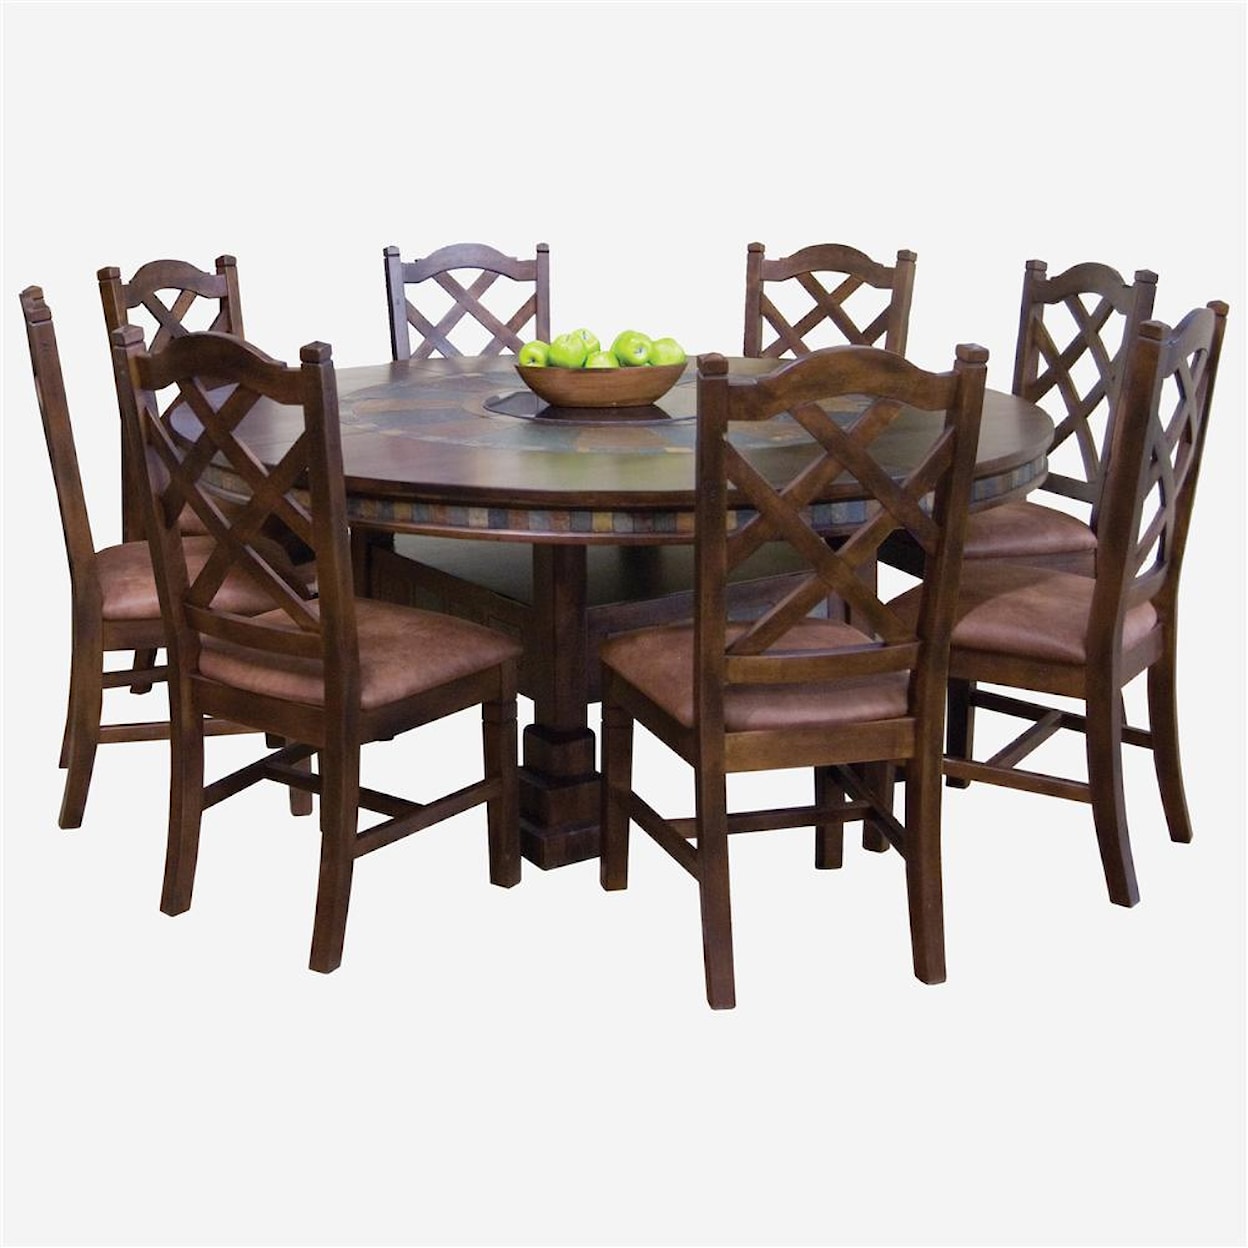 Sunny Designs Santa Fe. Round Dining Table and Chair Set